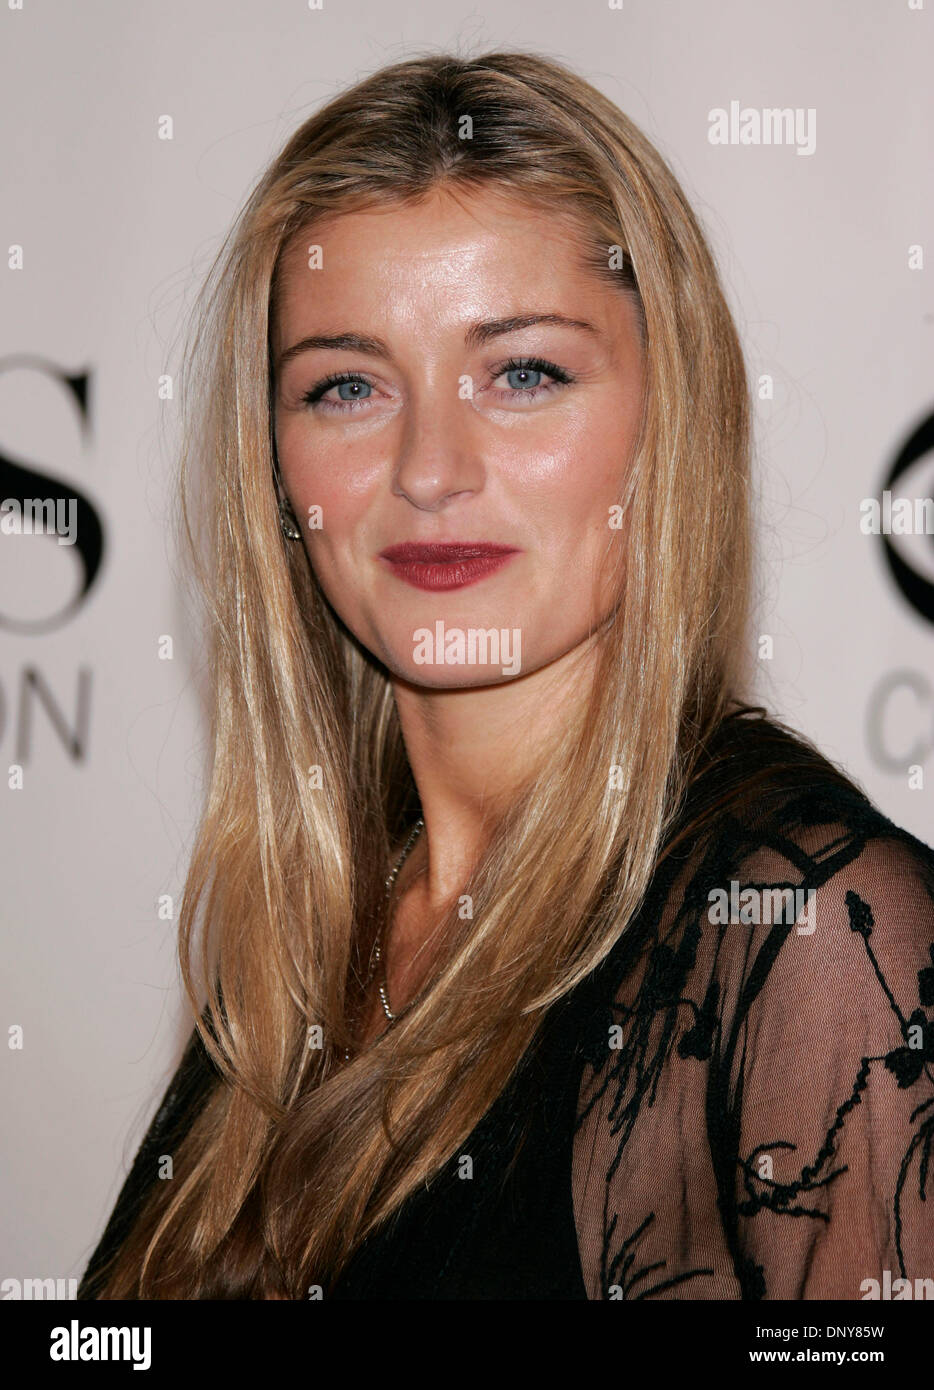 Jan 18, 2006; Pasadena, California, USA; Actress LOUISE LOMBARD at the CBS UPN SHOWTIME TCA Party held at the Wind Tunnel. Mandatory Credit: Photo by Lisa O'Connor/ZUMA Press. (©) Copyright 2006 by Lisa O'Connor Stock Photo